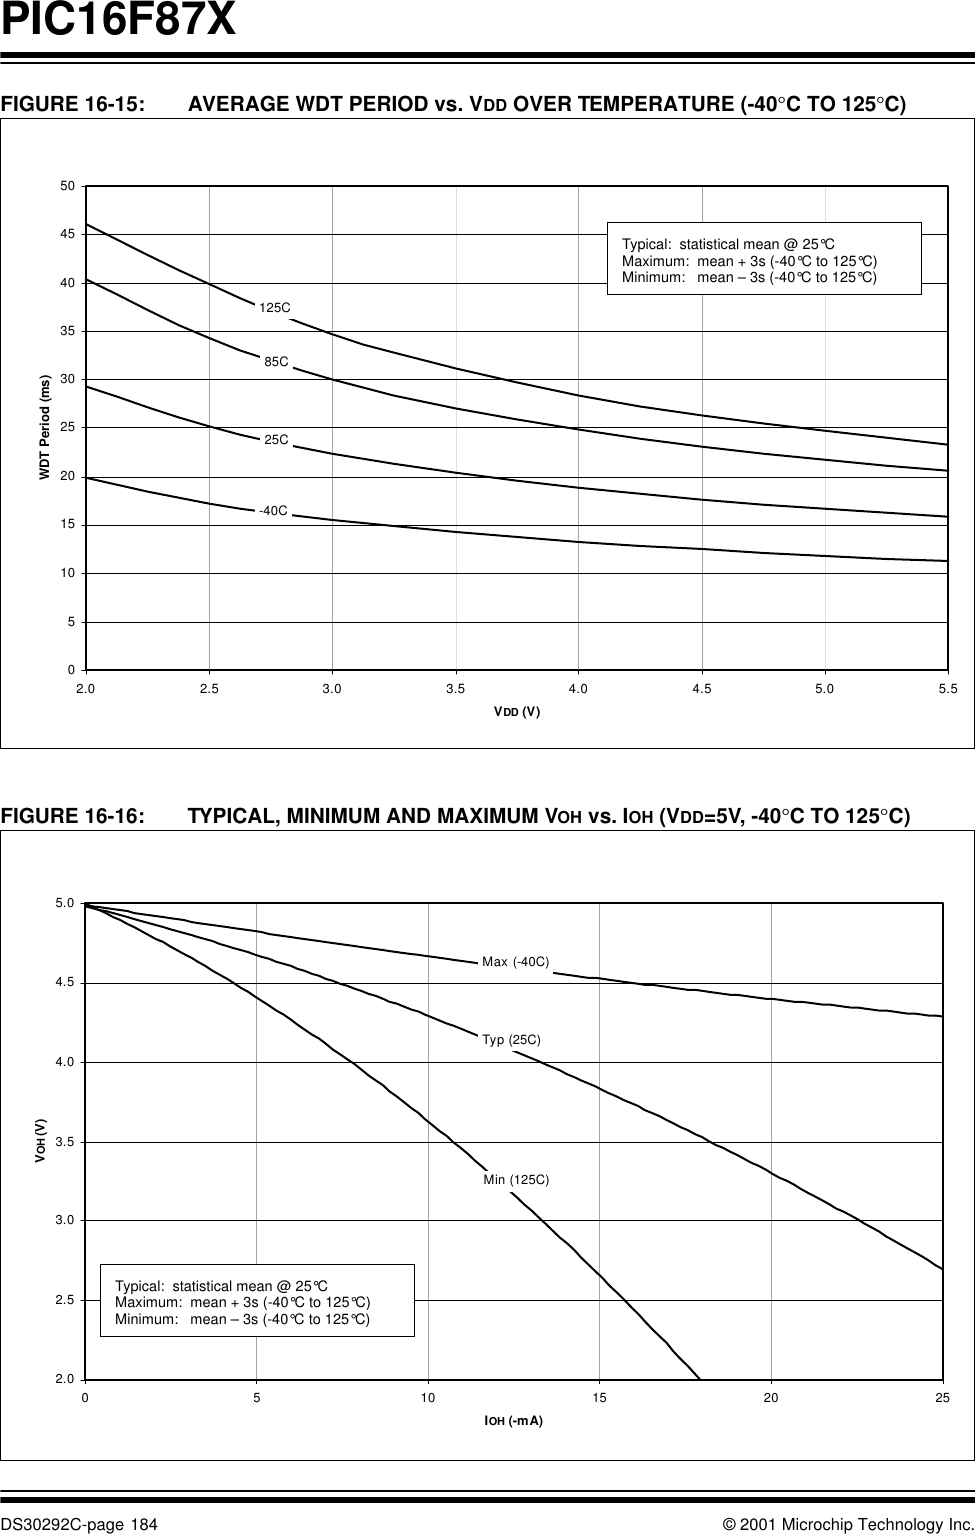 PIC16F87XDS30292C-page 184 © 2001 Microchip Technology Inc.FIGURE 16-15: AVERAGE WDT PERIOD vs. VDD OVER TEMPERATURE (-40°C TO 125°C) FIGURE 16-16: TYPICAL, MINIMUM AND MAXIMUM VOH vs. IOH (VDD=5V, -40°C TO 125°C)051015202530354045502.0 2.5 3.0 3.5 4.0 4.5 5.0 5.5VDD (V)WDT Period (ms)85C125C25C-40CTypical:  statistical mean @ 25°CMaximum:  mean + 3s (-40°C to 125°C) Minimum:   mean – 3s (-40°C to 125°C)2.02.53.03.54.04.55.00 5 10 15 20 25IOH (-mA)VOH (V)Max (-40C)Typ (25C)Min (125C)Typical:  statistical mean @ 25°CMaximum:  mean + 3s (-40°C to 125°C) Minimum:   mean – 3s (-40°C to 125°C)